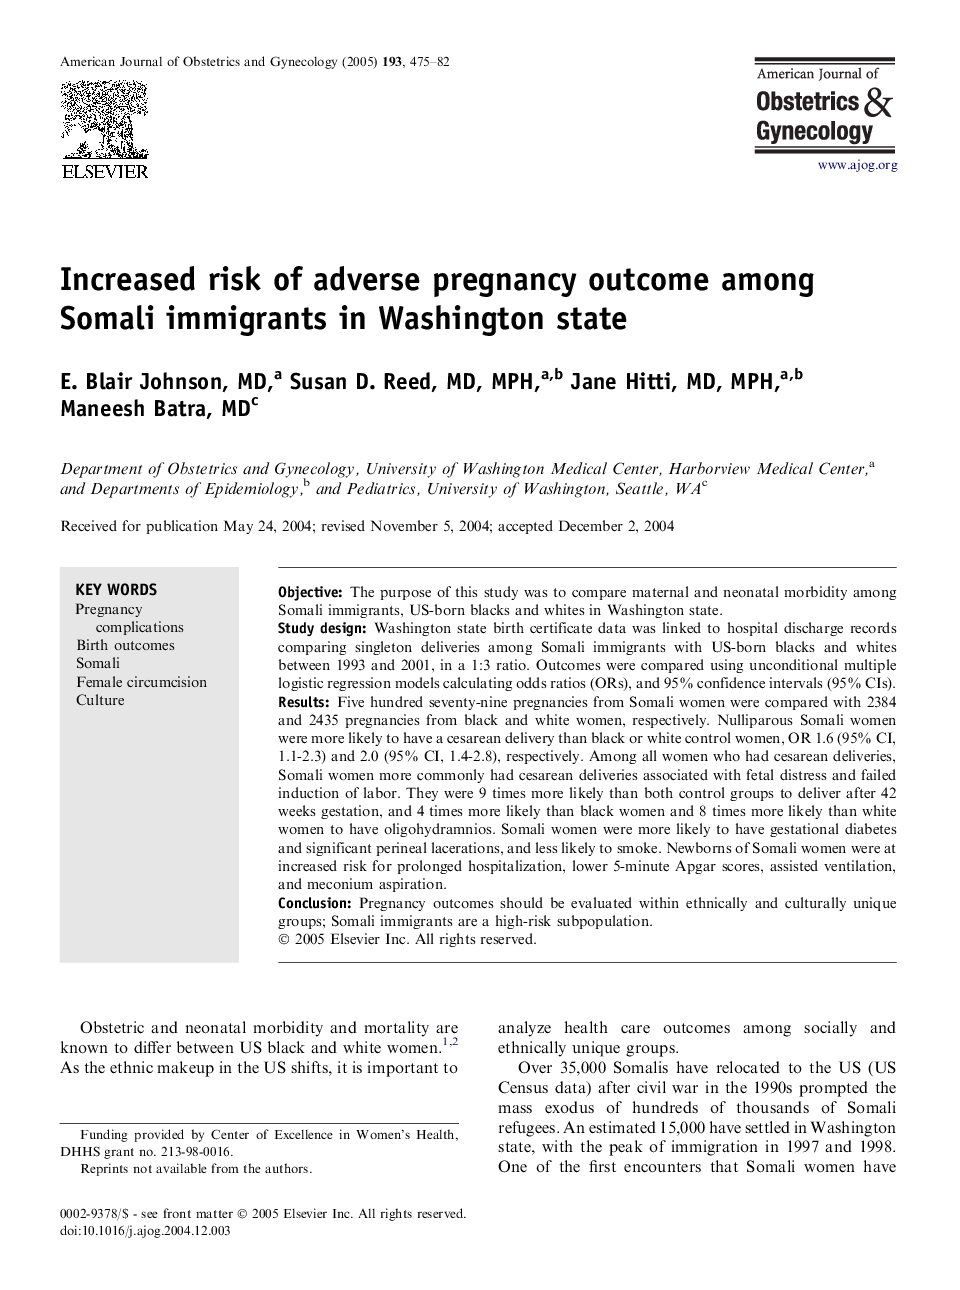 Increased risk of adverse pregnancy outcome among Somali immigrants in Washington state